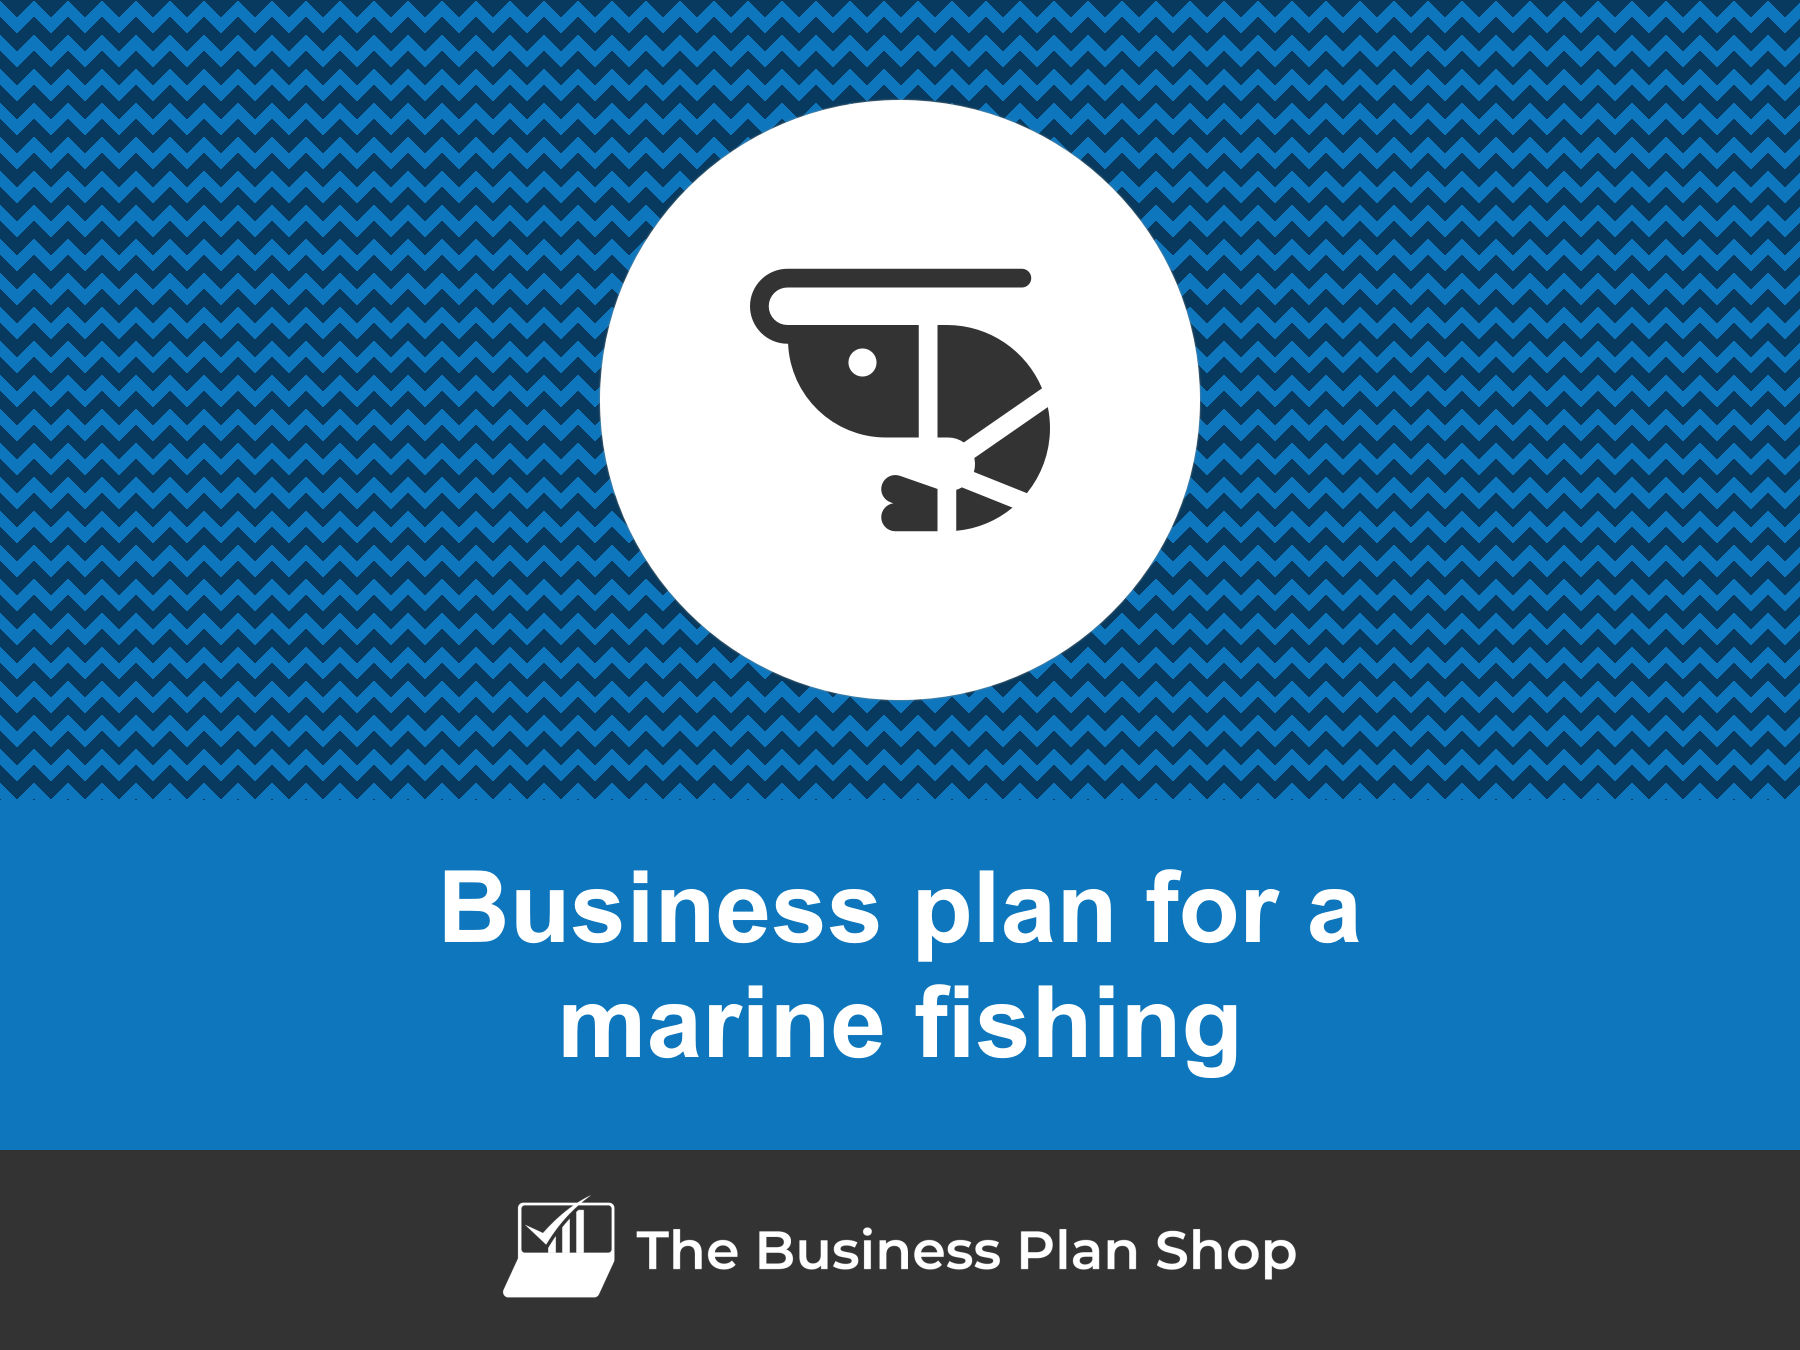 How to write a business plan for a marine fishing company?